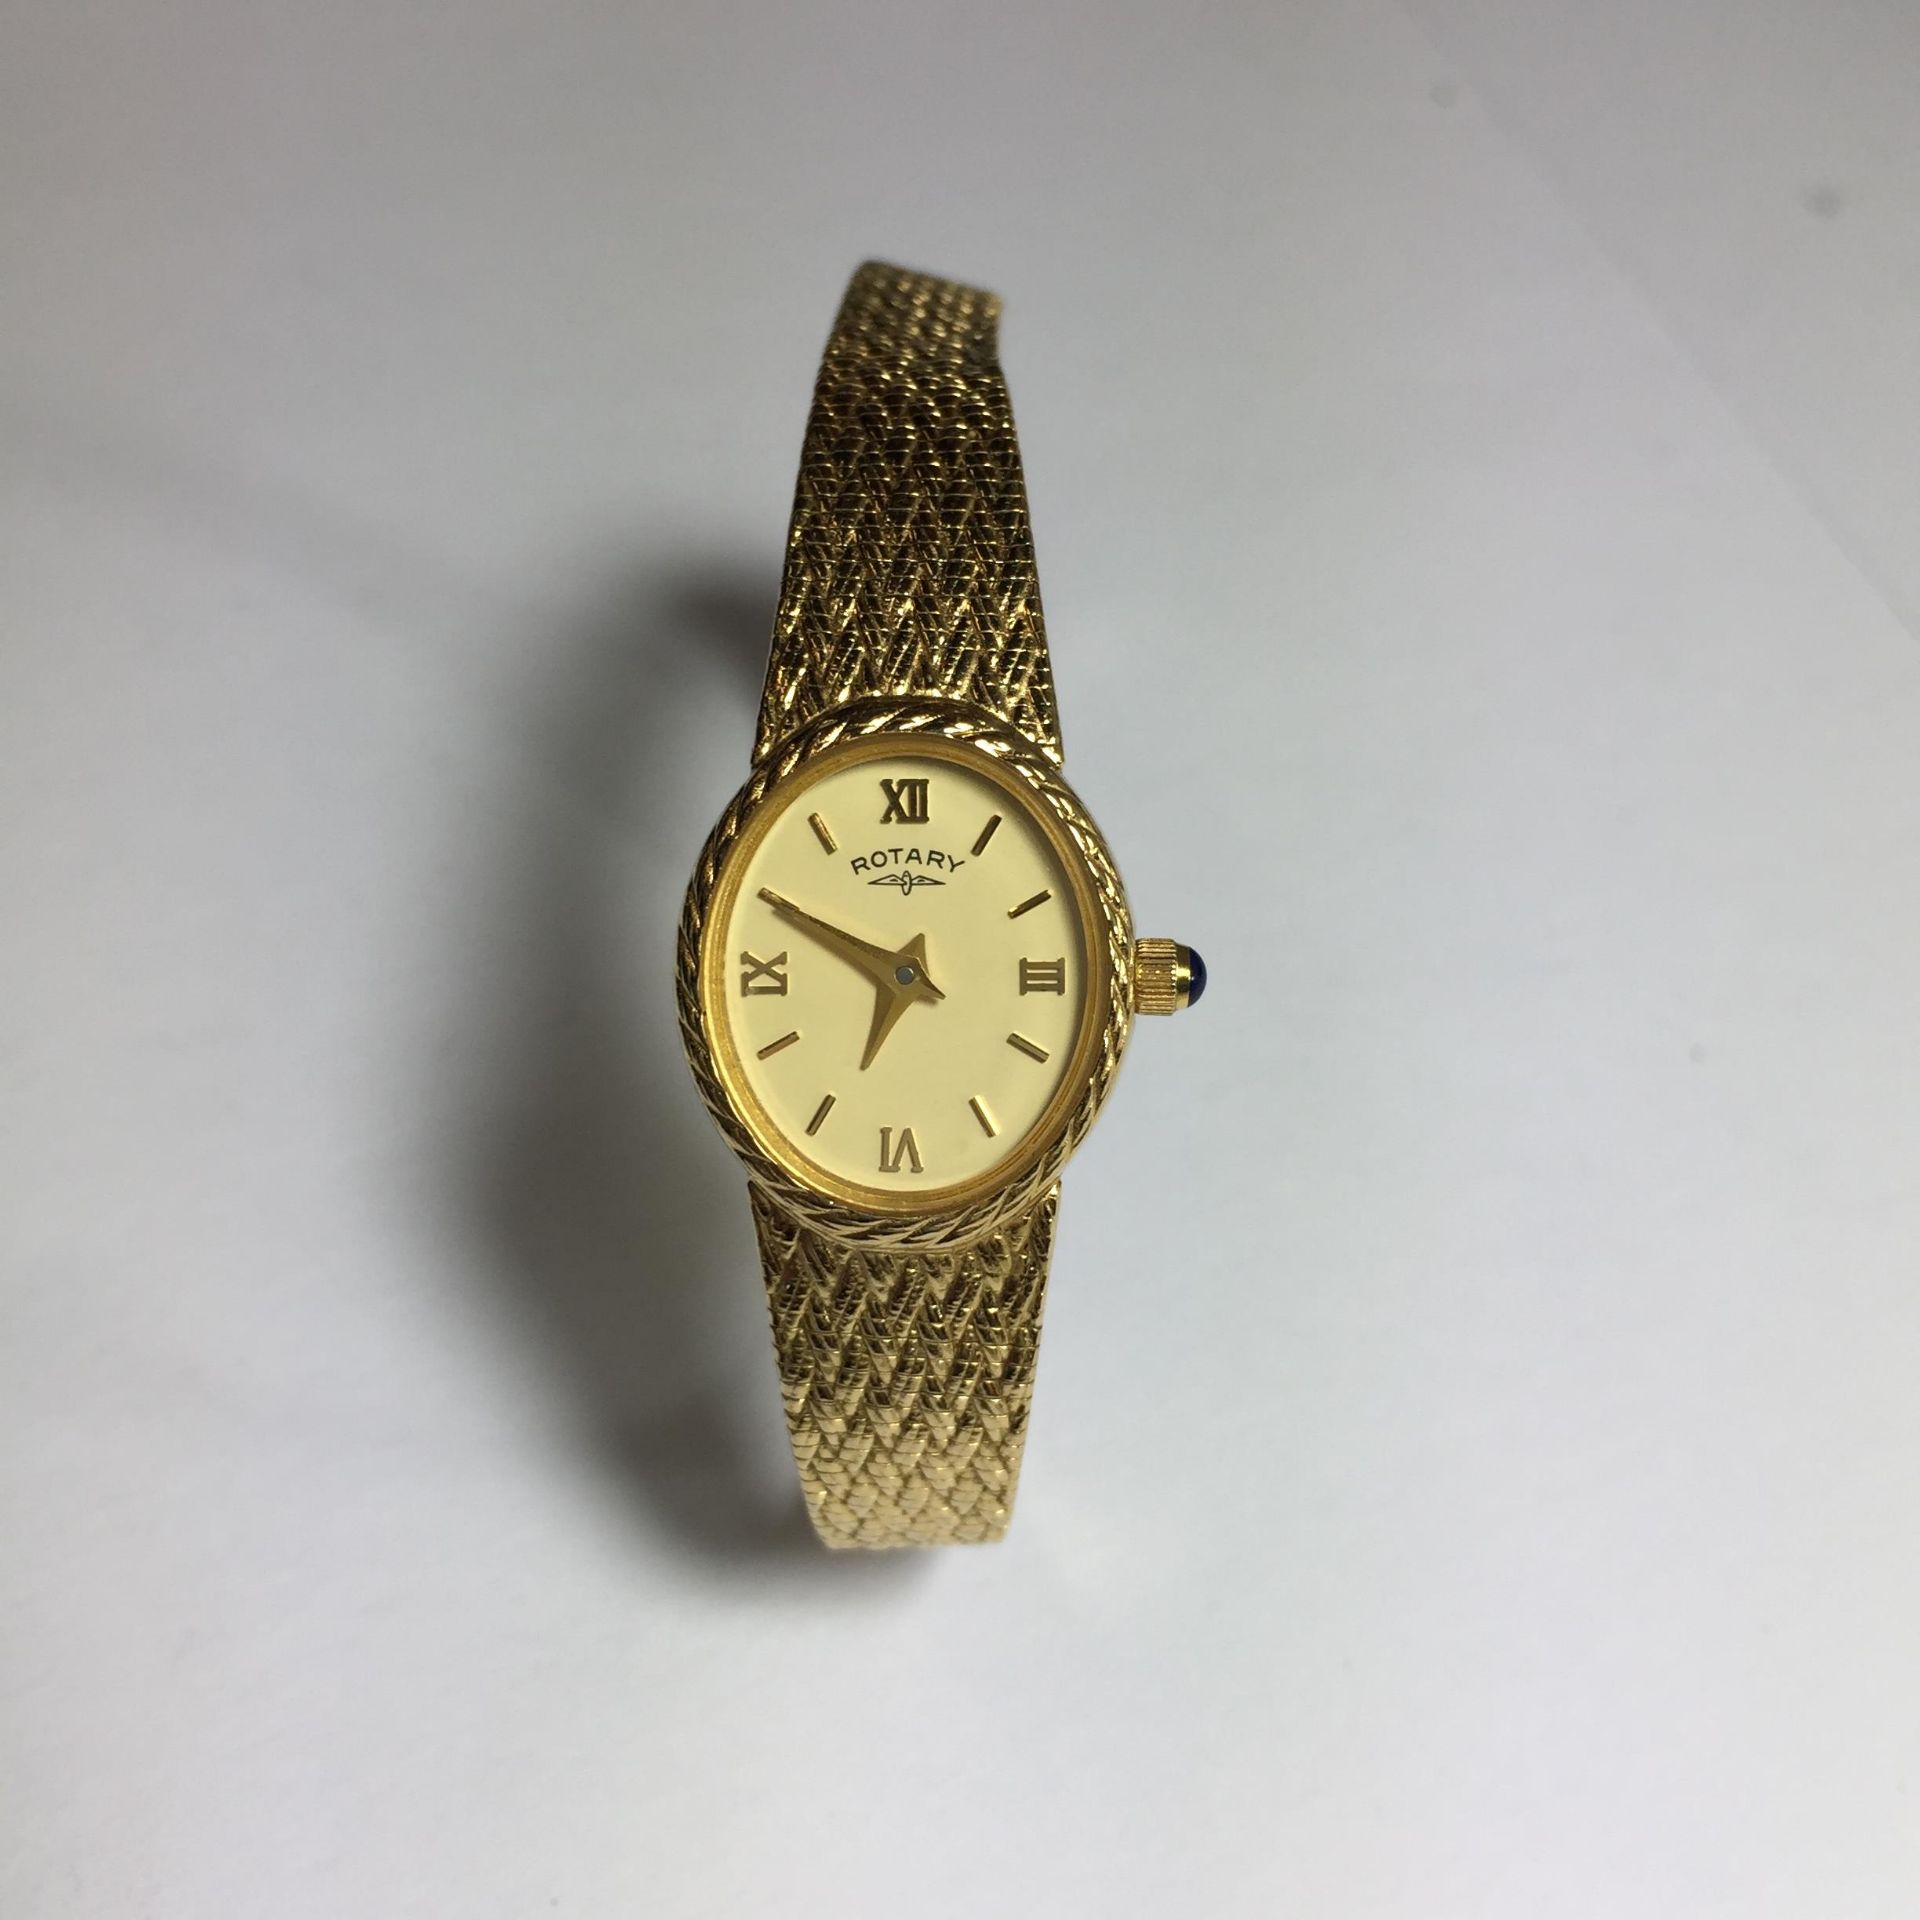 A LADIES GOLD PLATED SLIM DRESS WATCH - Image 2 of 3